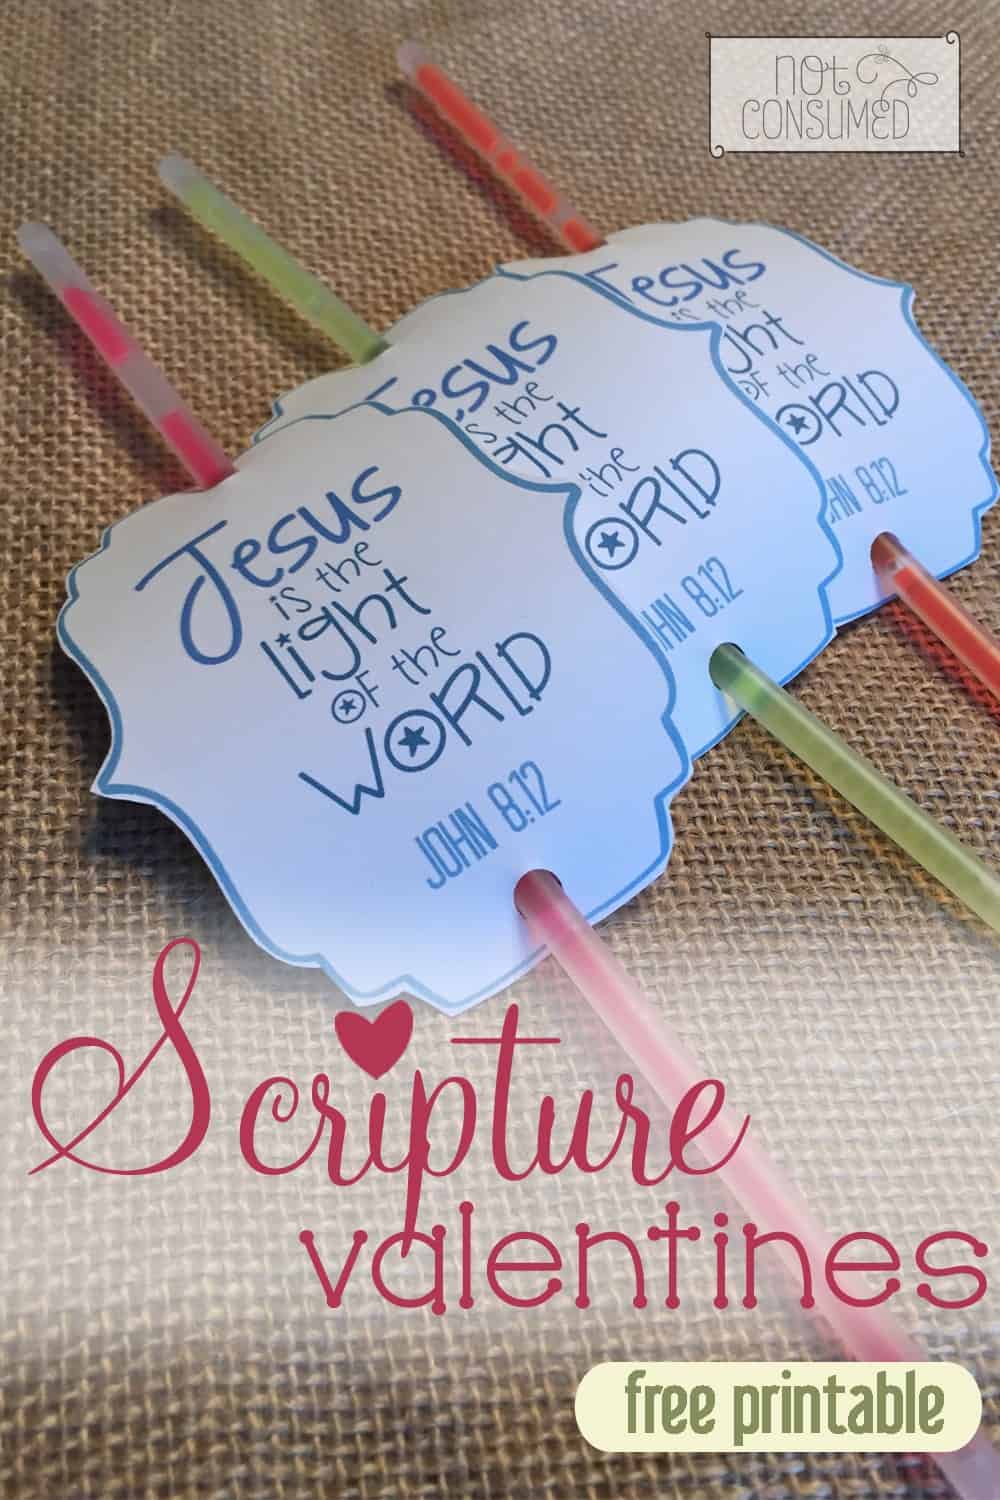 Looking for non-candy valentines? These simple and FREE scripture valentines are the perfect fit. Share God's love, keep the sugar at bay and do it all for $1. 